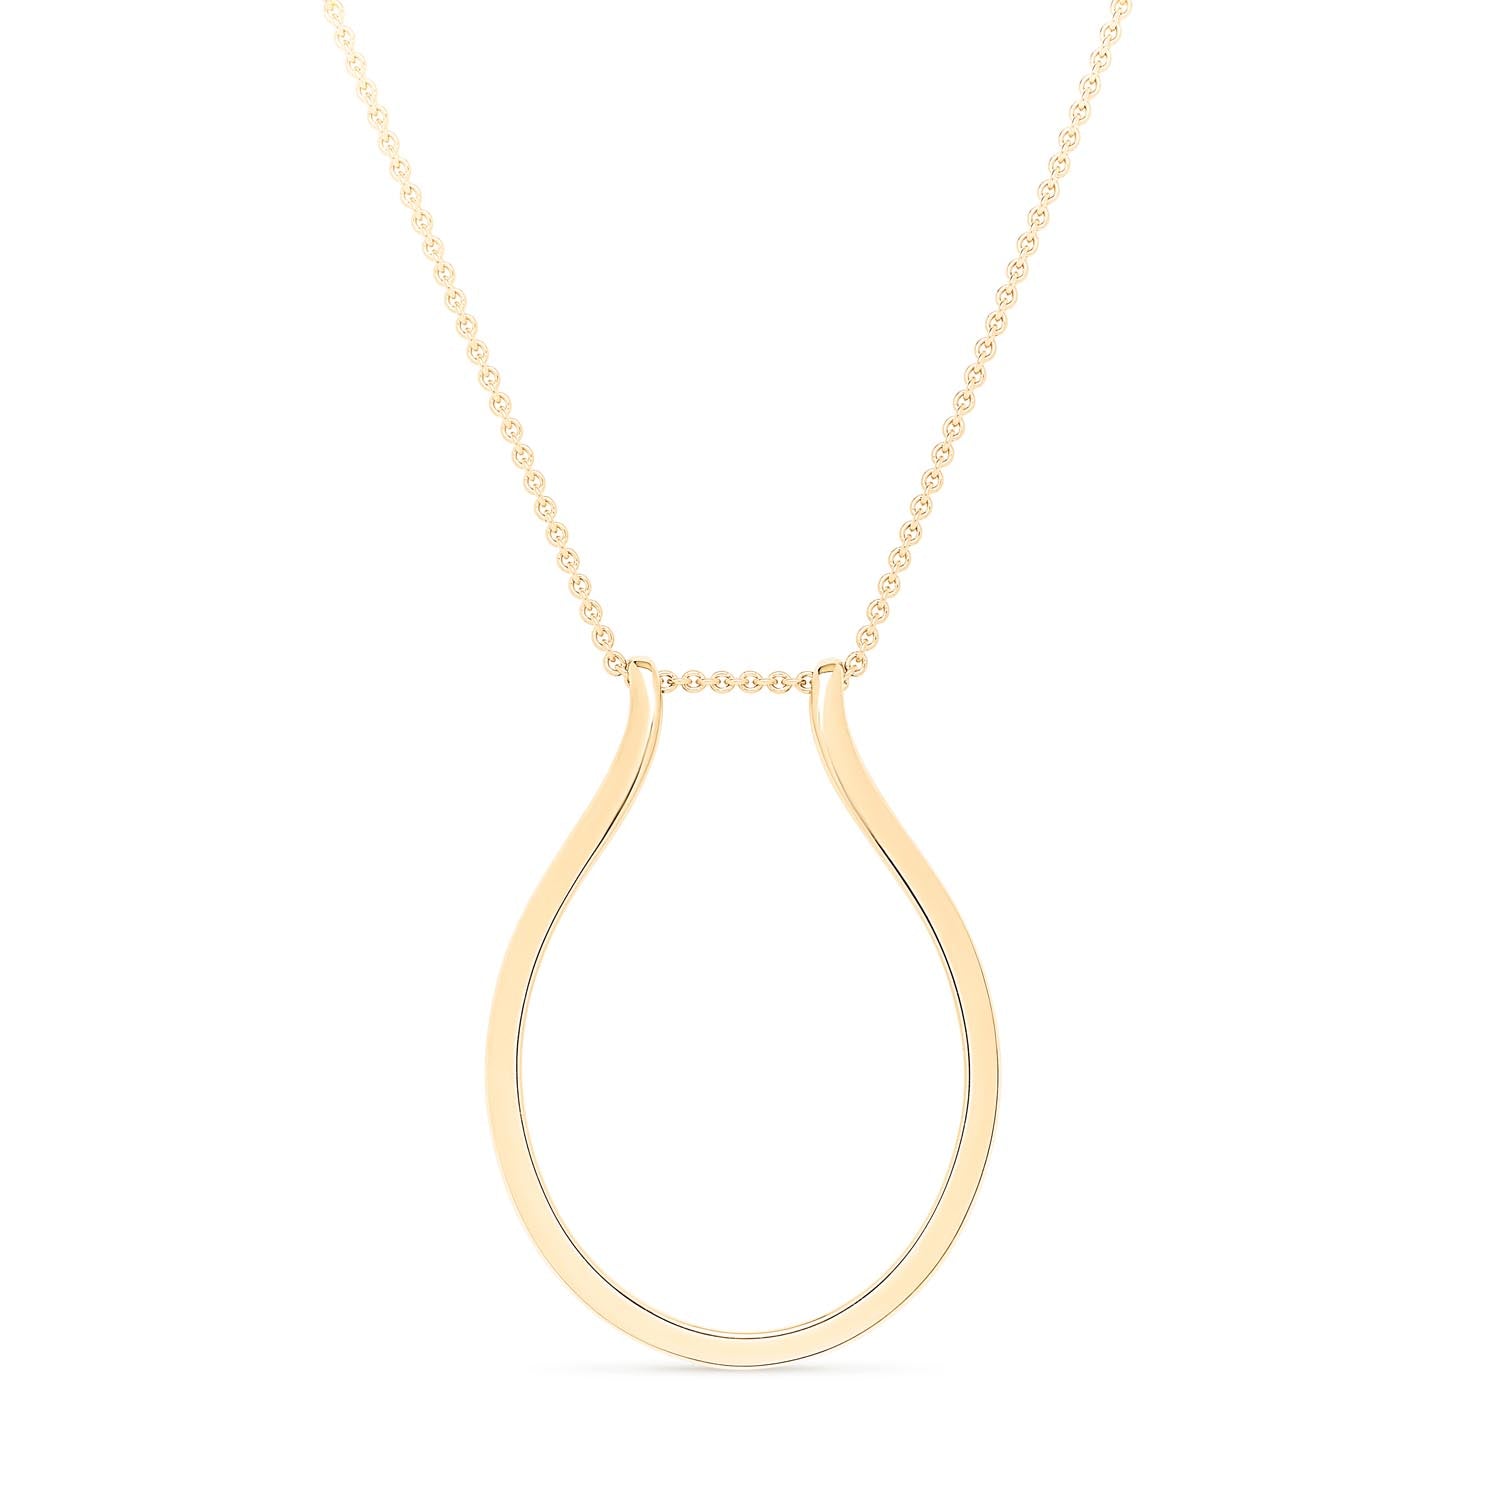 Ring Holder Necklace - Yellow Gold